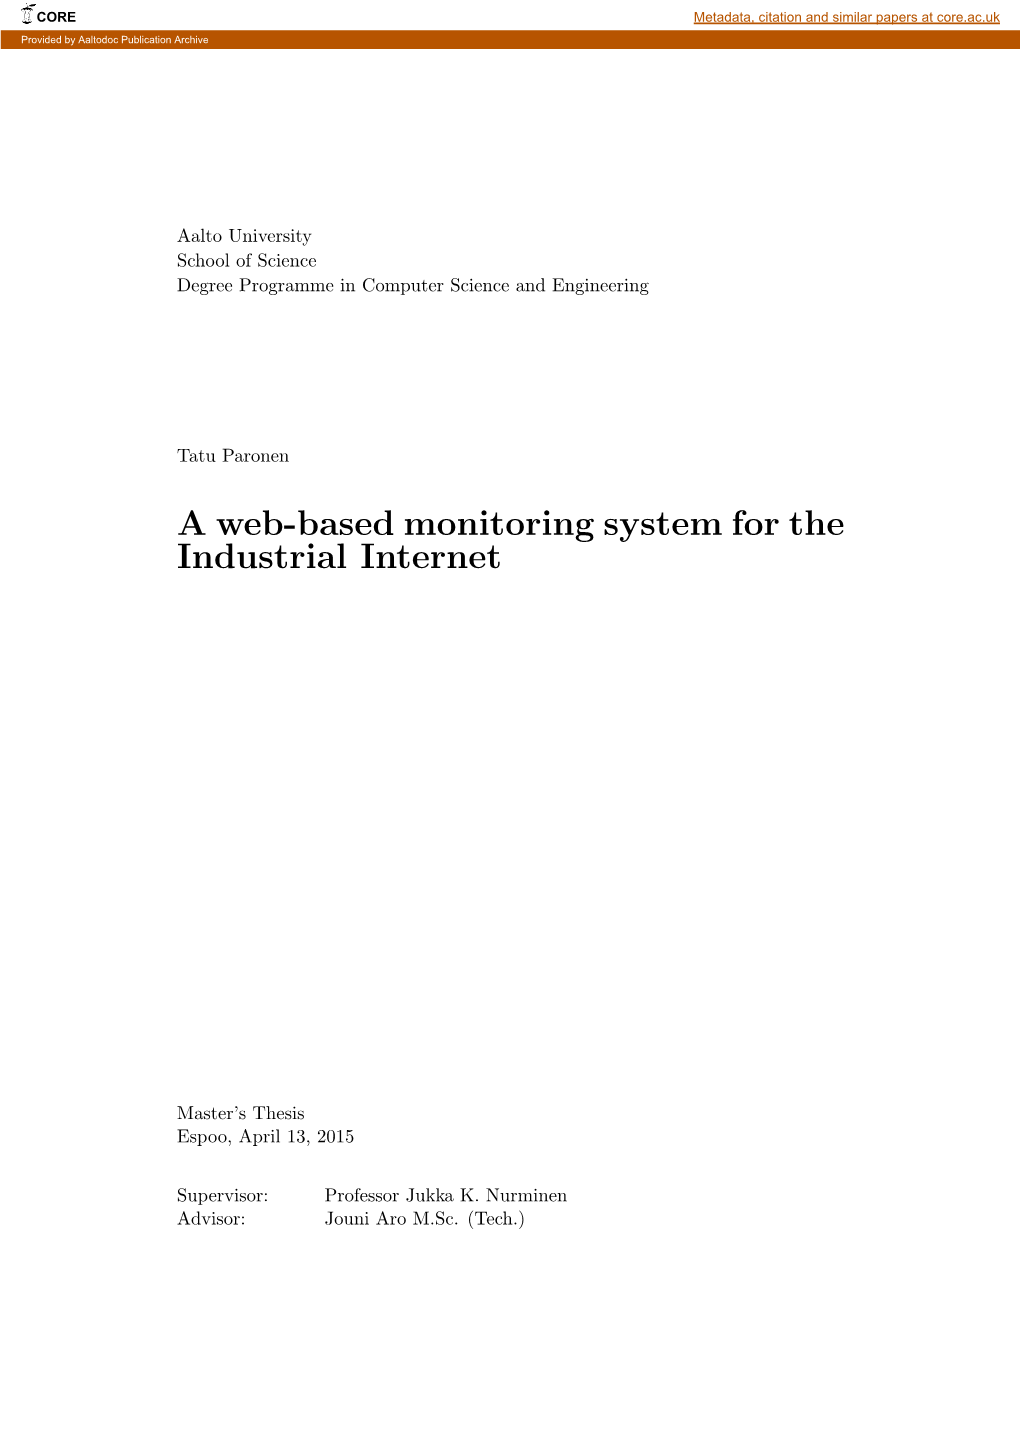 A Web-Based Monitoring System for the Industrial Internet